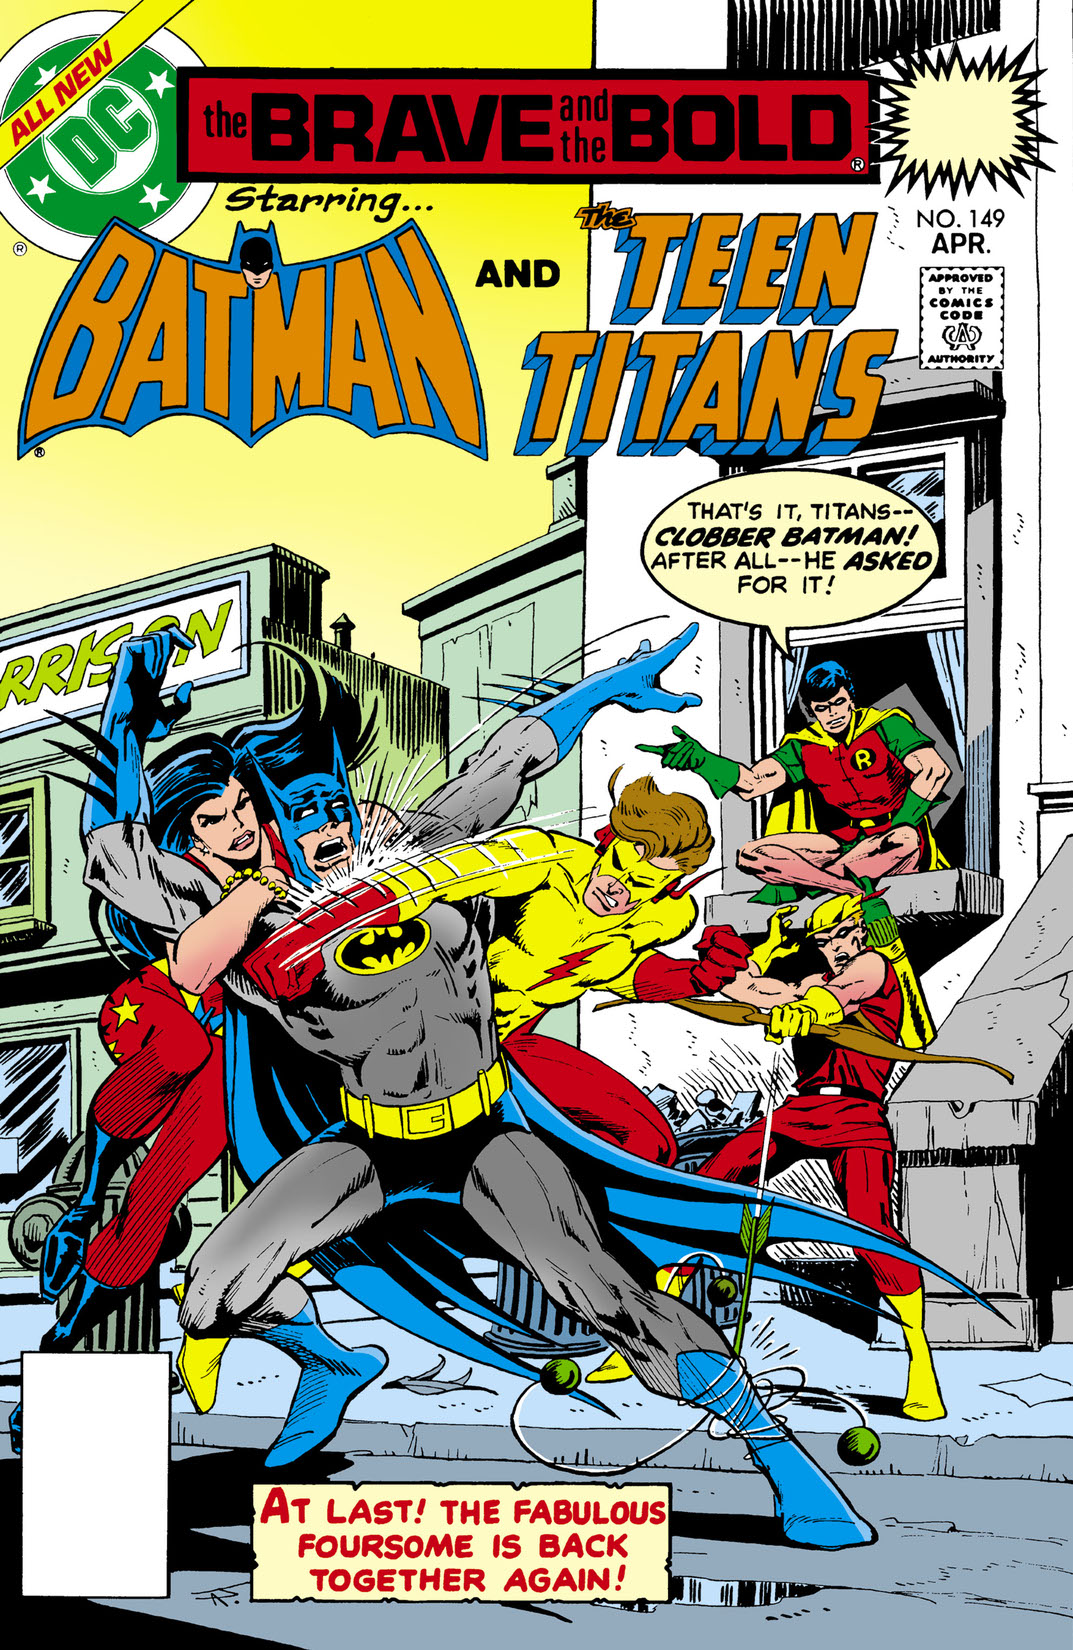 The Brave and the Bold (1955-) #149 preview images